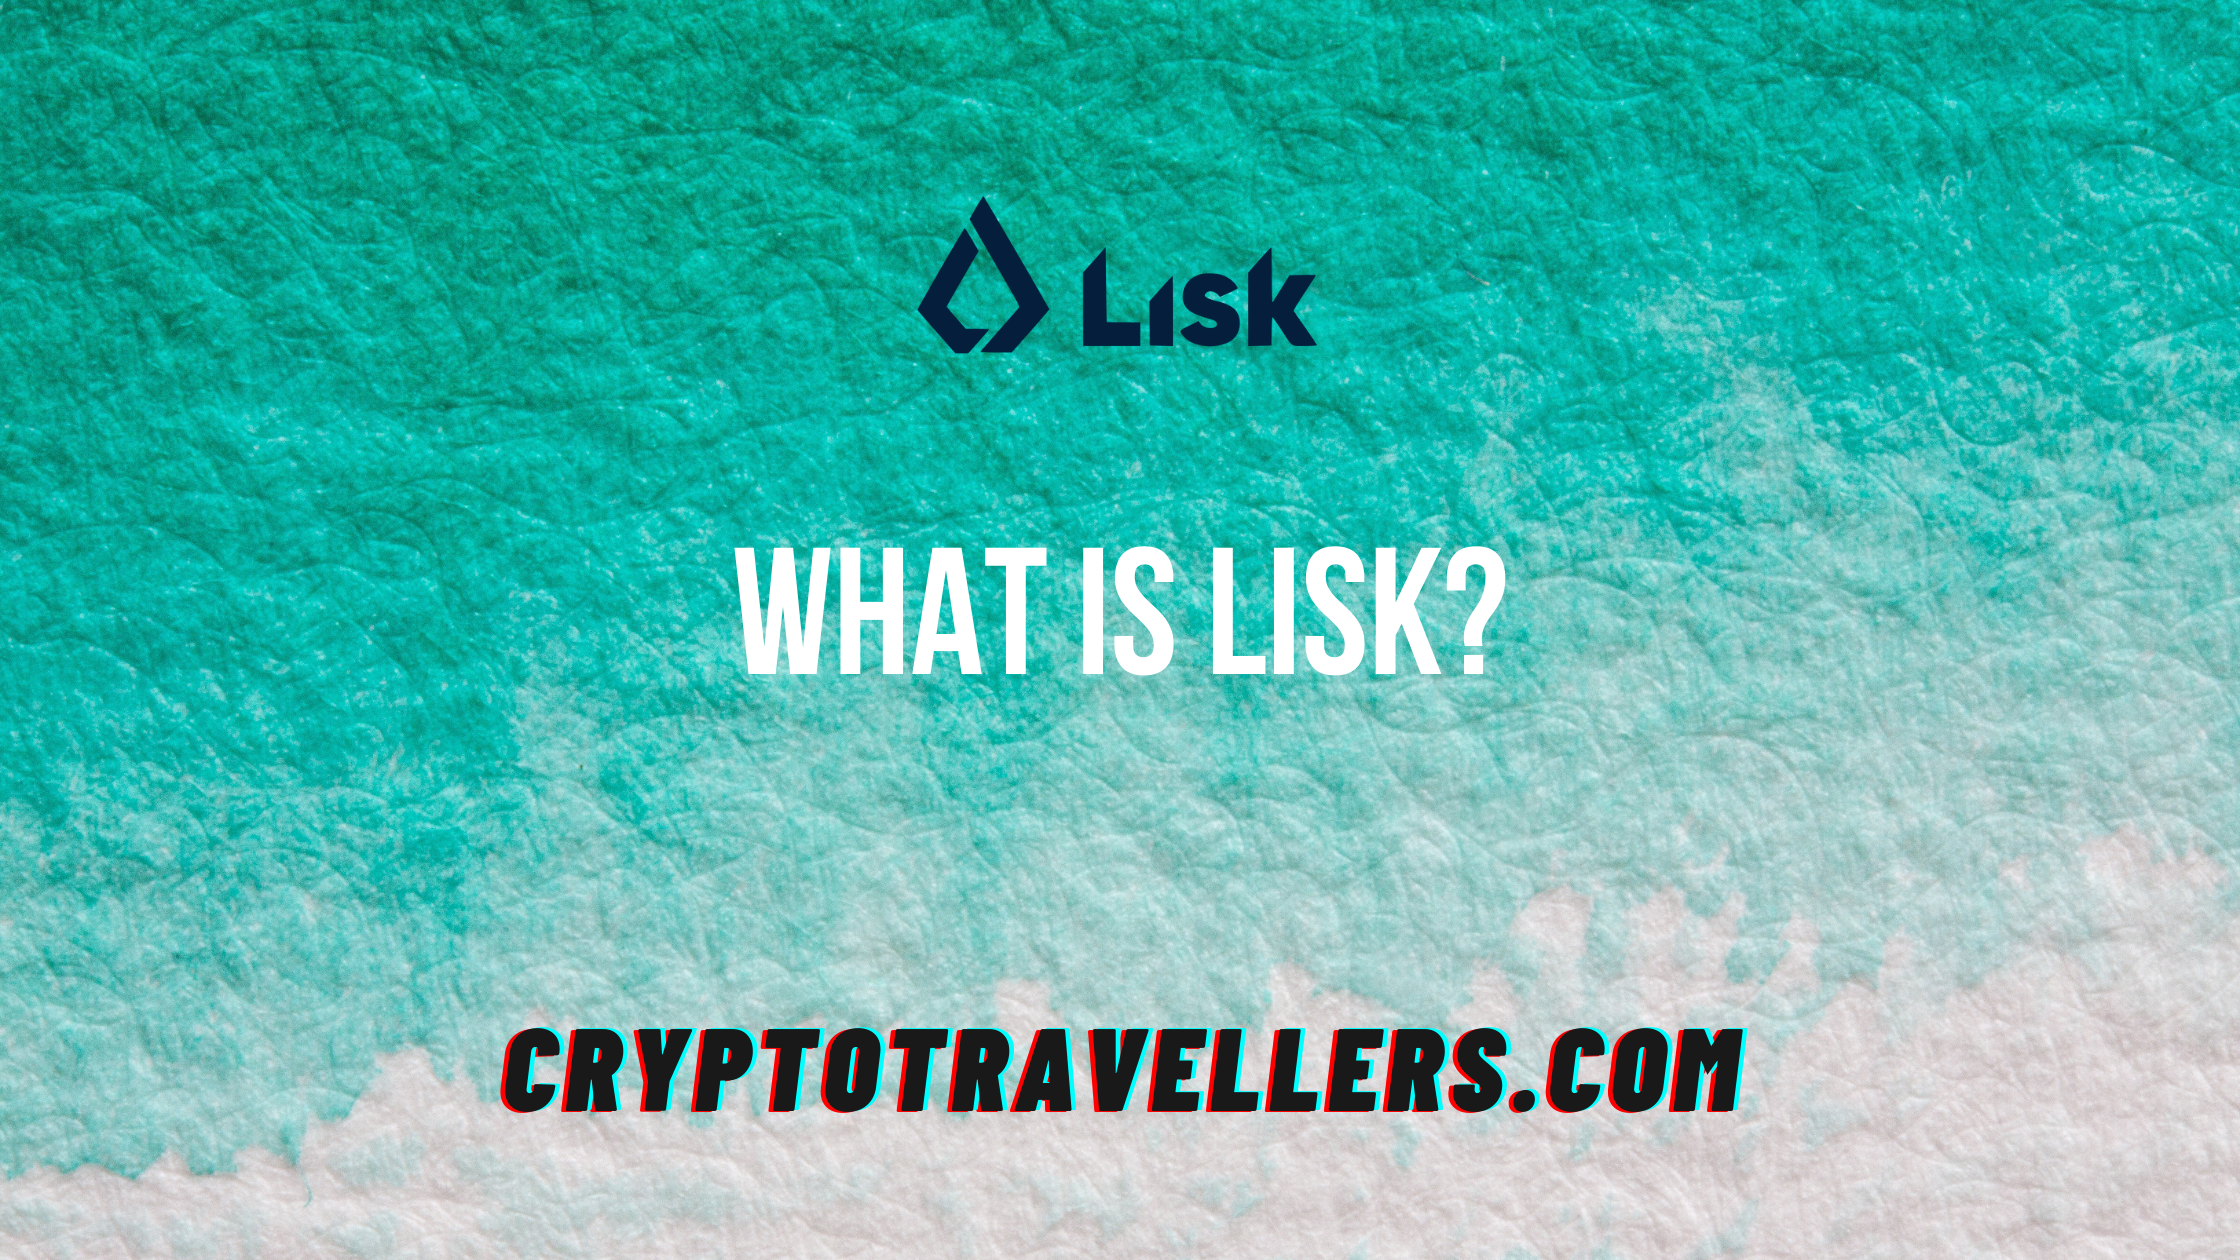 What is Lisk?